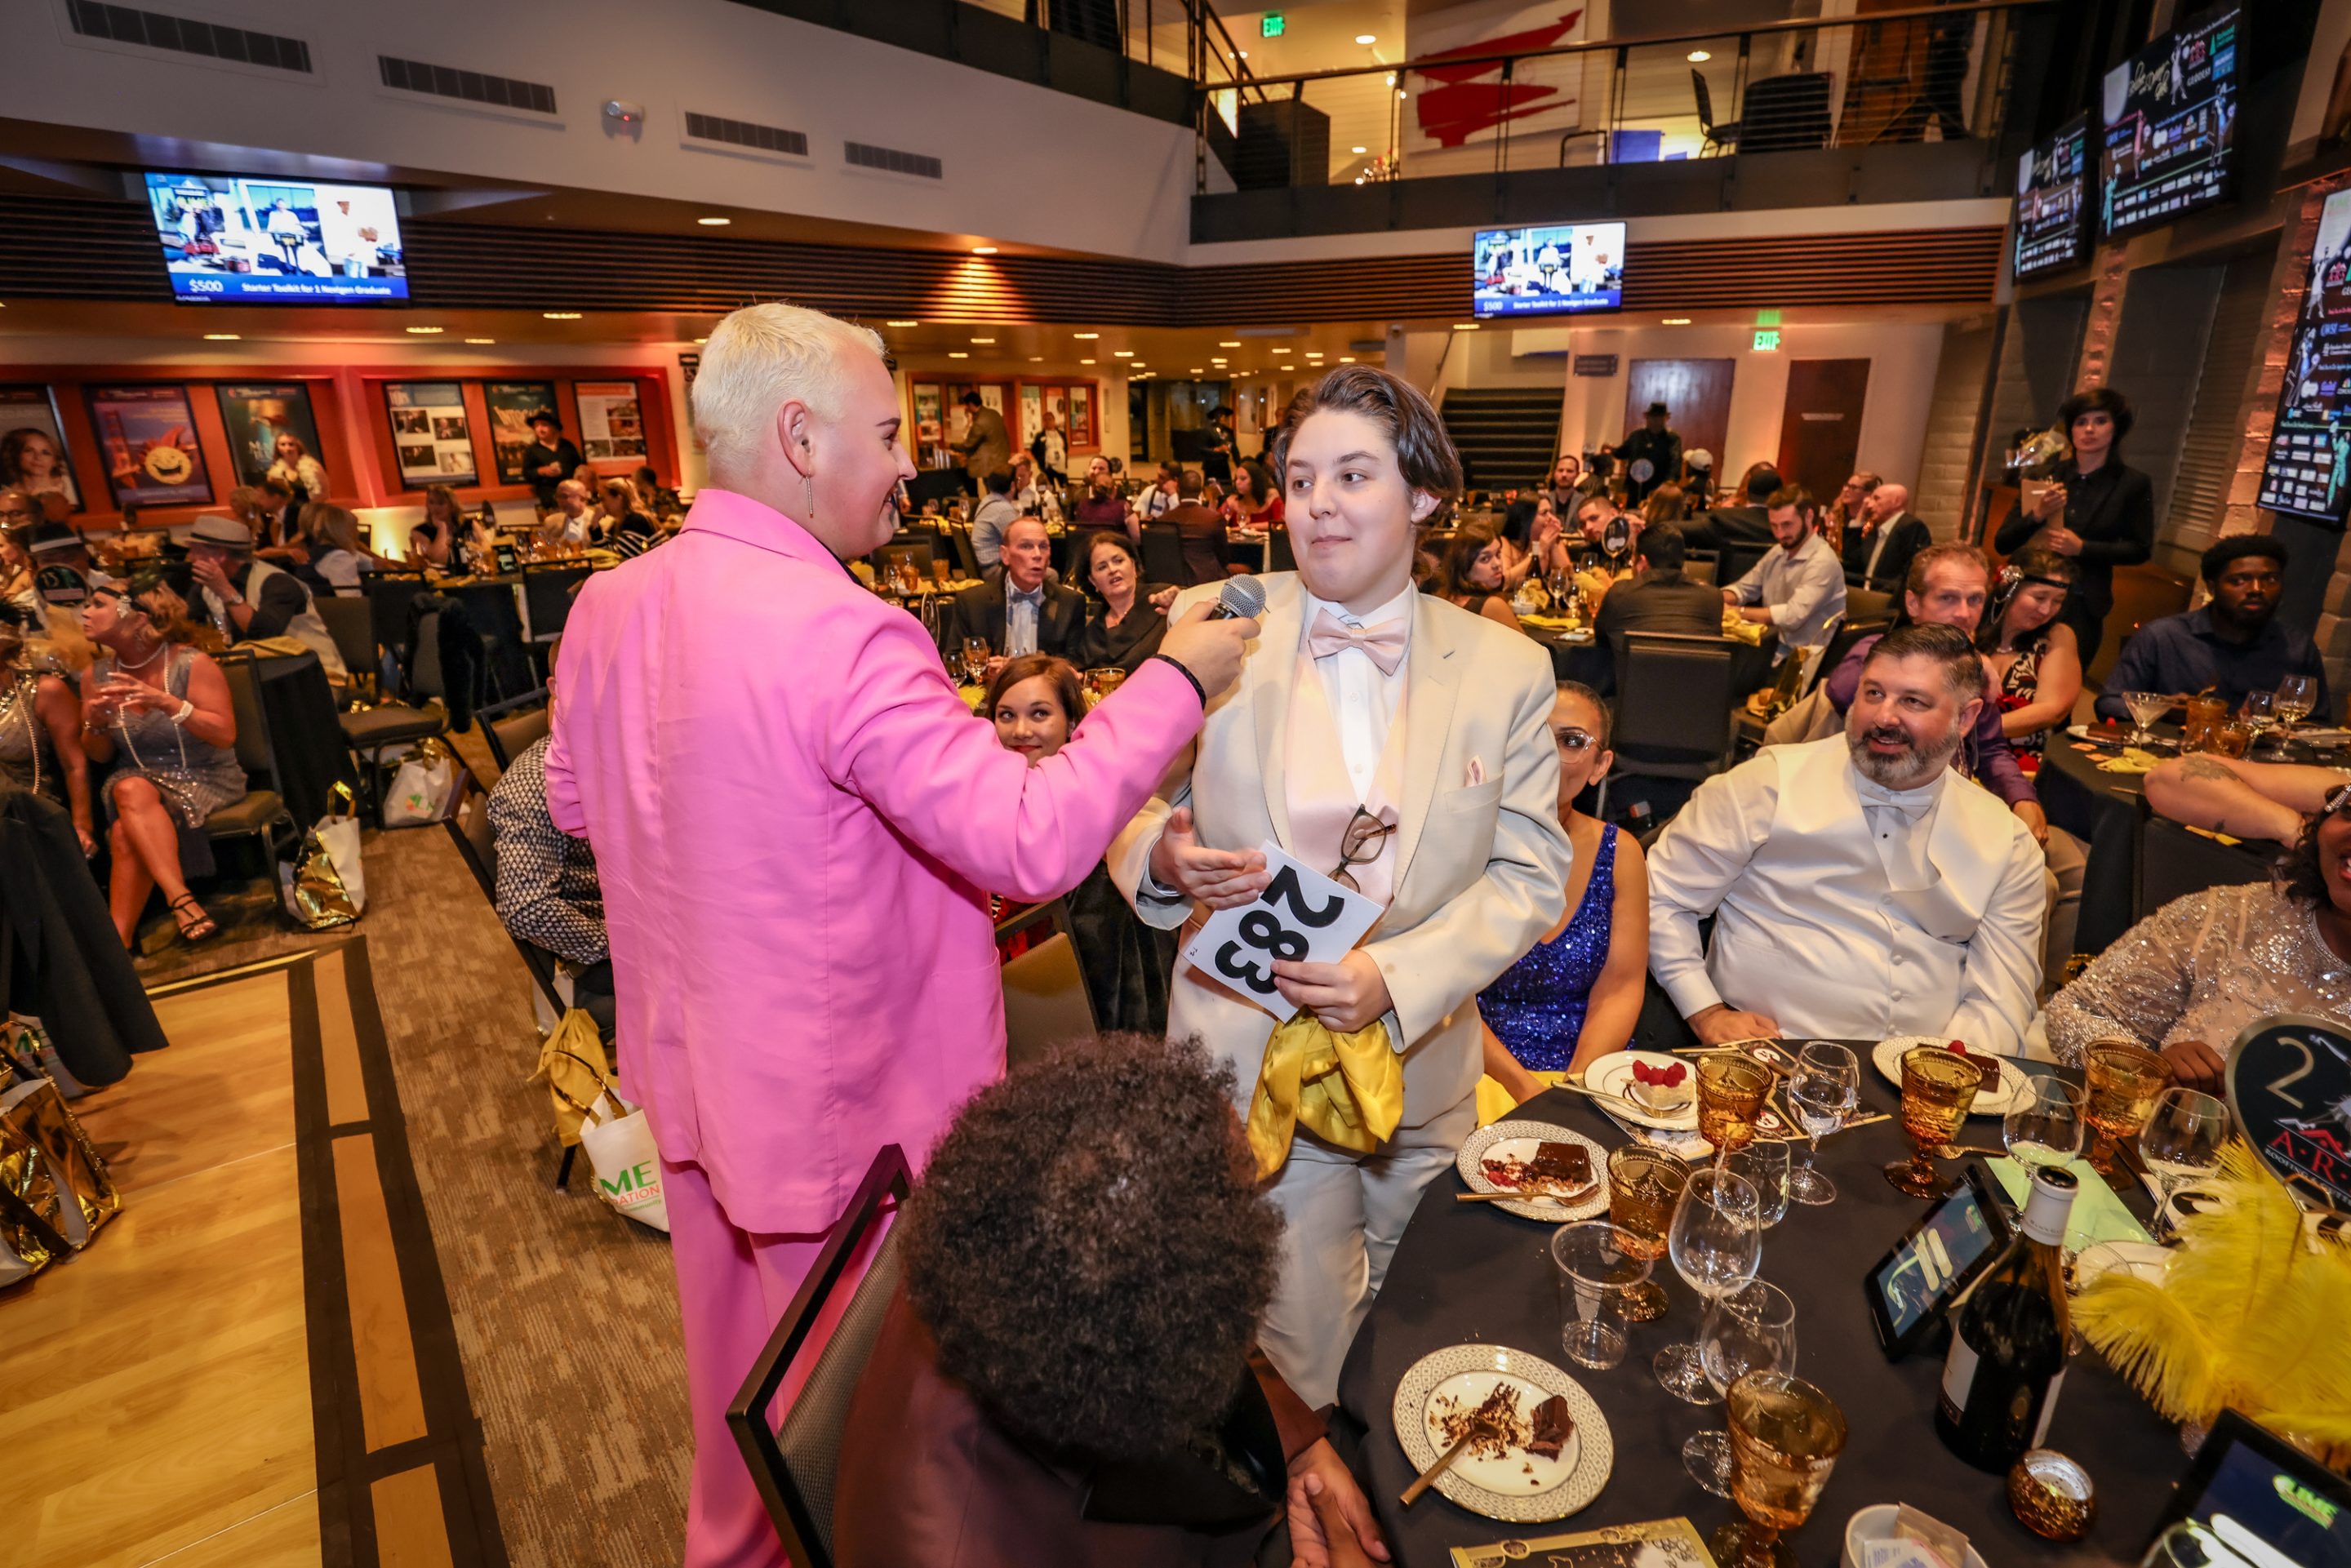 At a table, a man in a pink suit shakes hands with another man at a Sonoma County non-profit organization event.